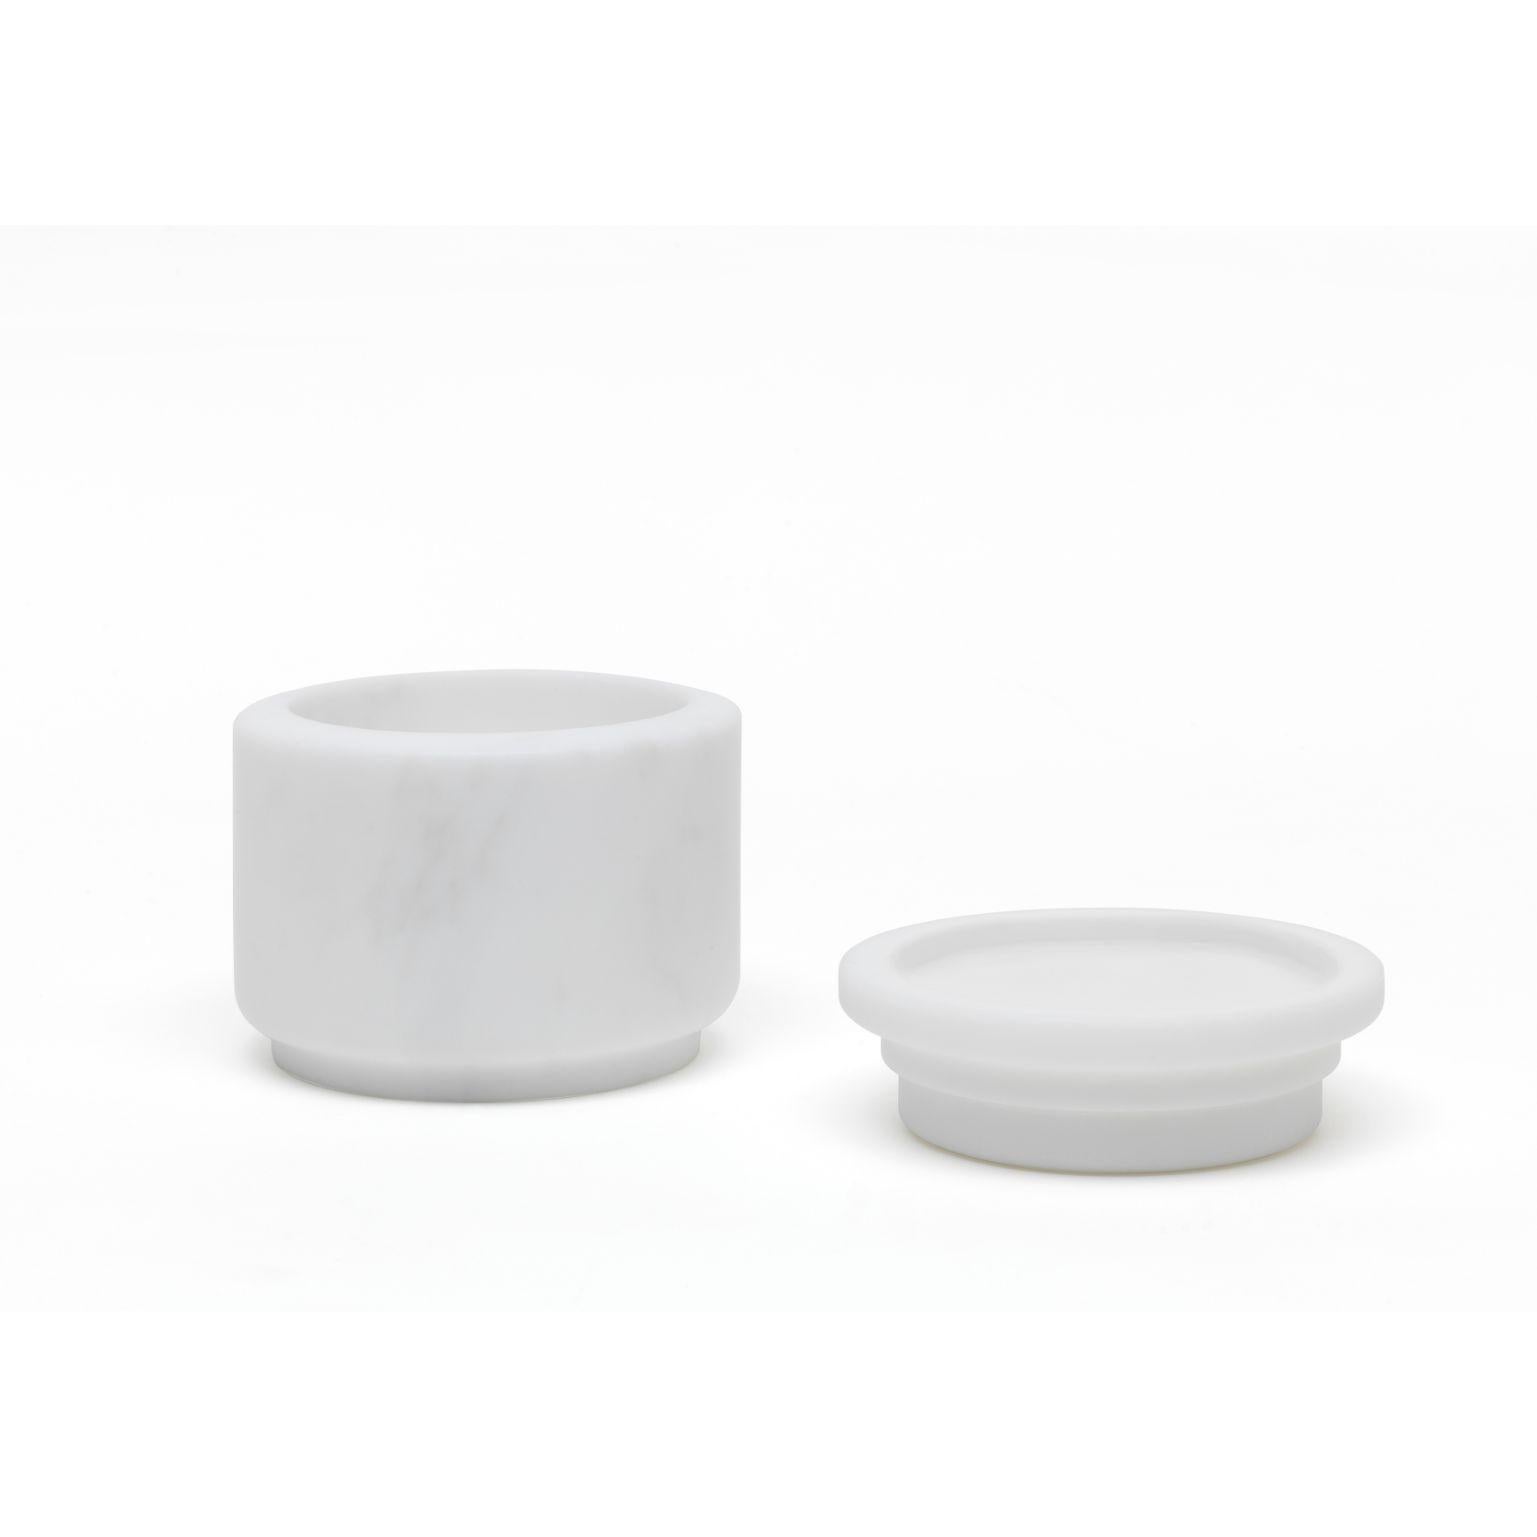 Marble Set of 3 Pyxis Pots, White by Ivan Colominas